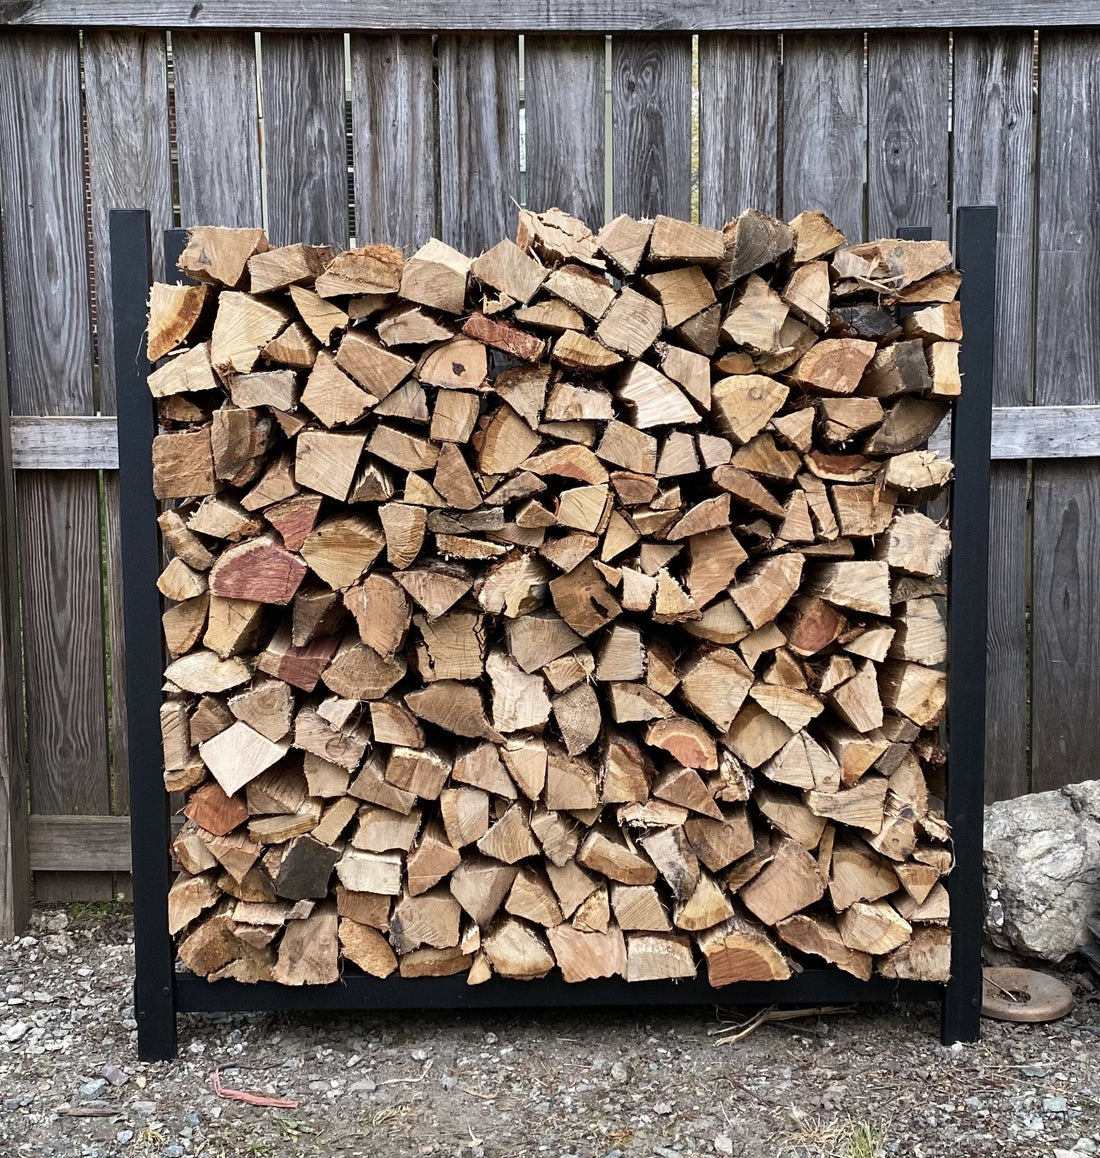 kiln dried firewood on demand delivery local 